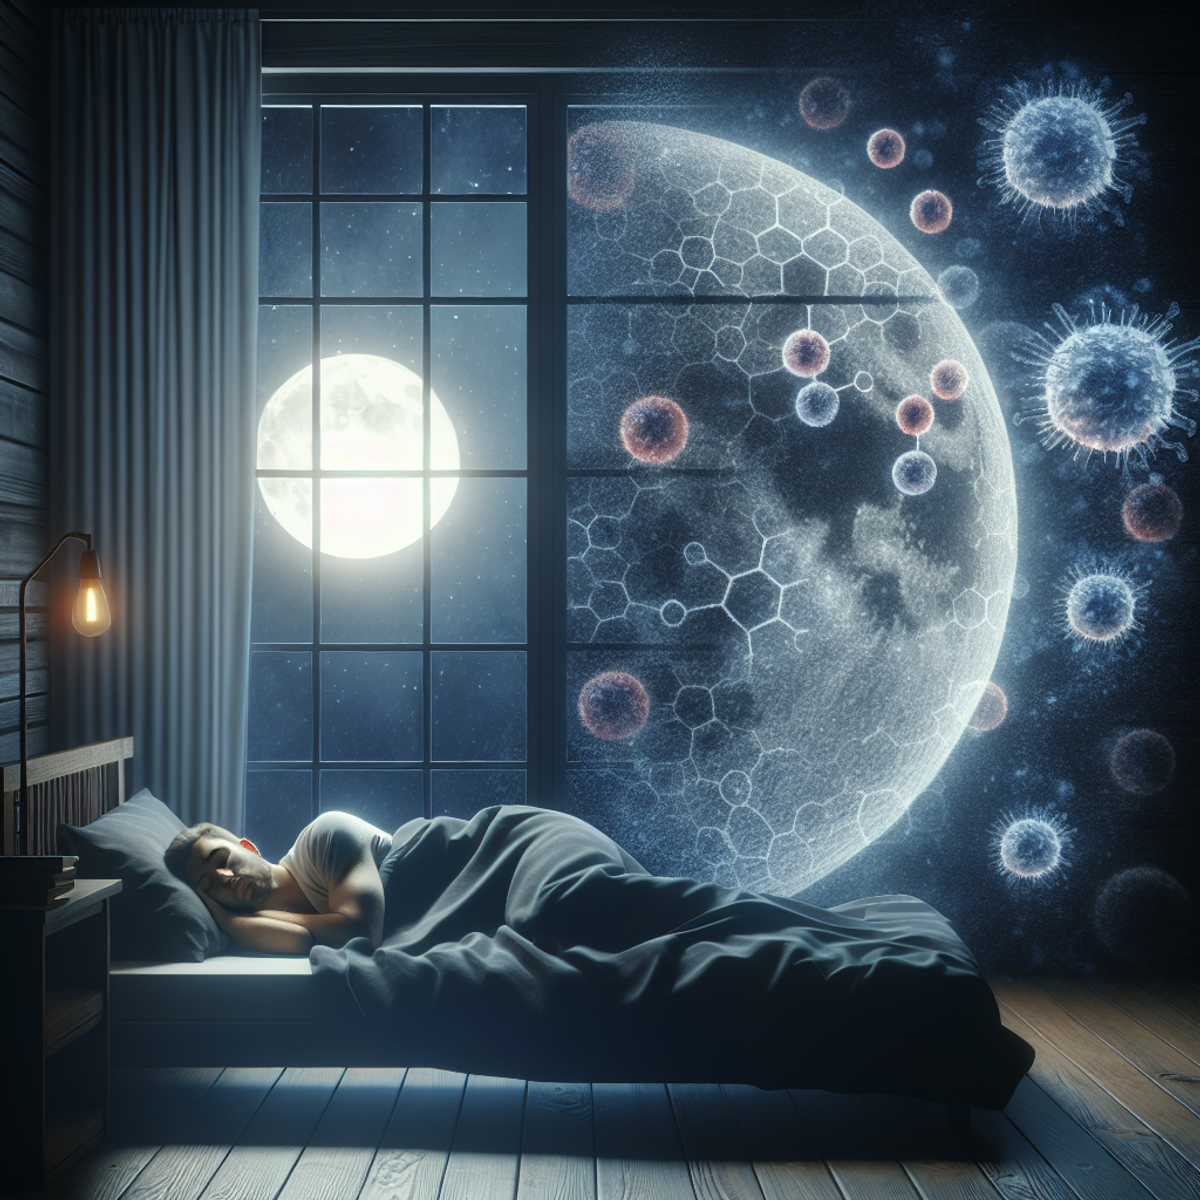 A person sleeping peapefully in a moonlit thetom, with an immune cell and melatonin molecules in the background.